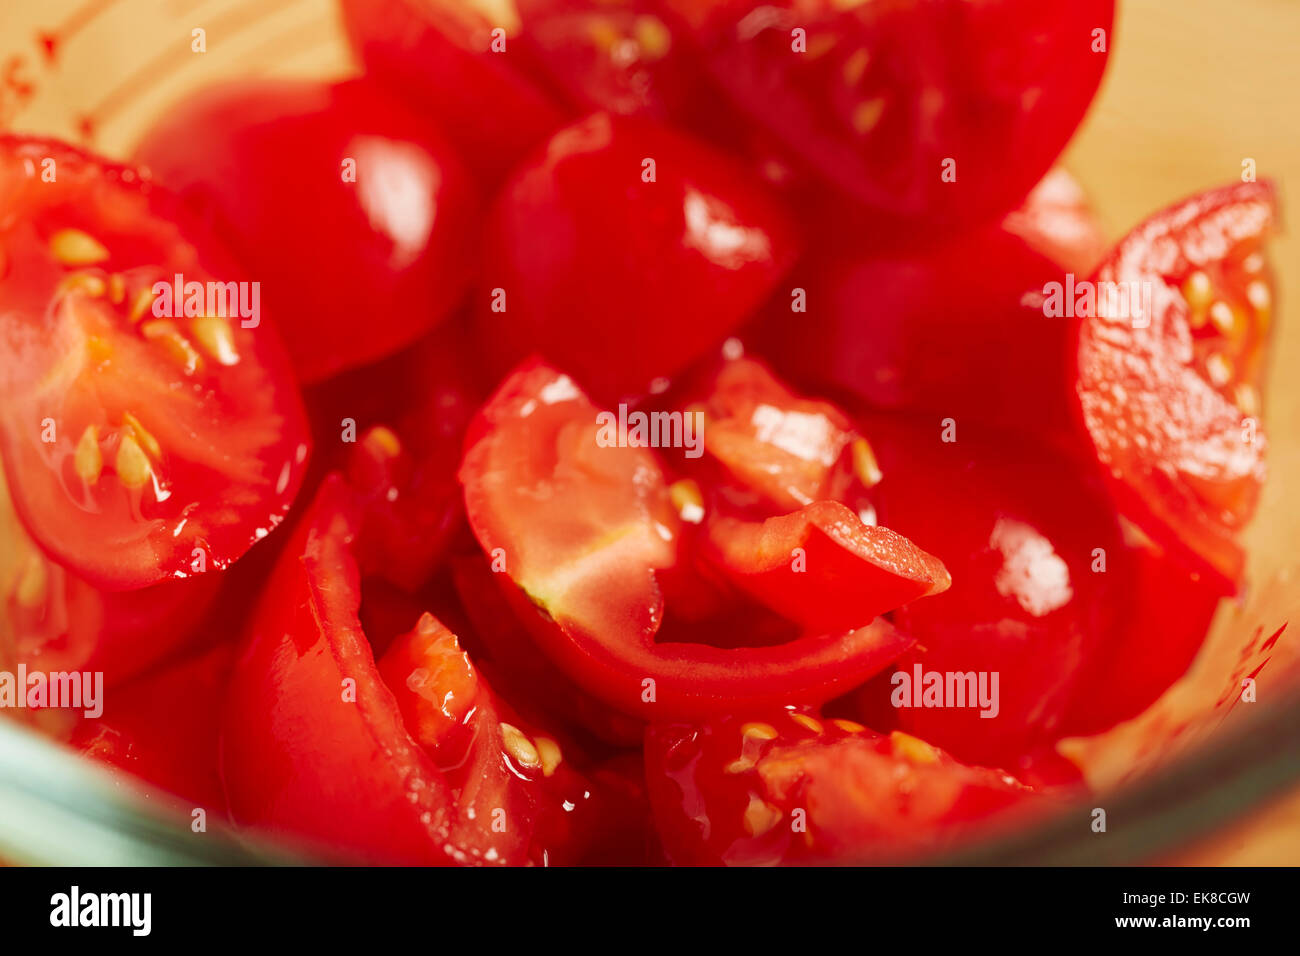 cut up wedges of cherry tomato Stock Photo